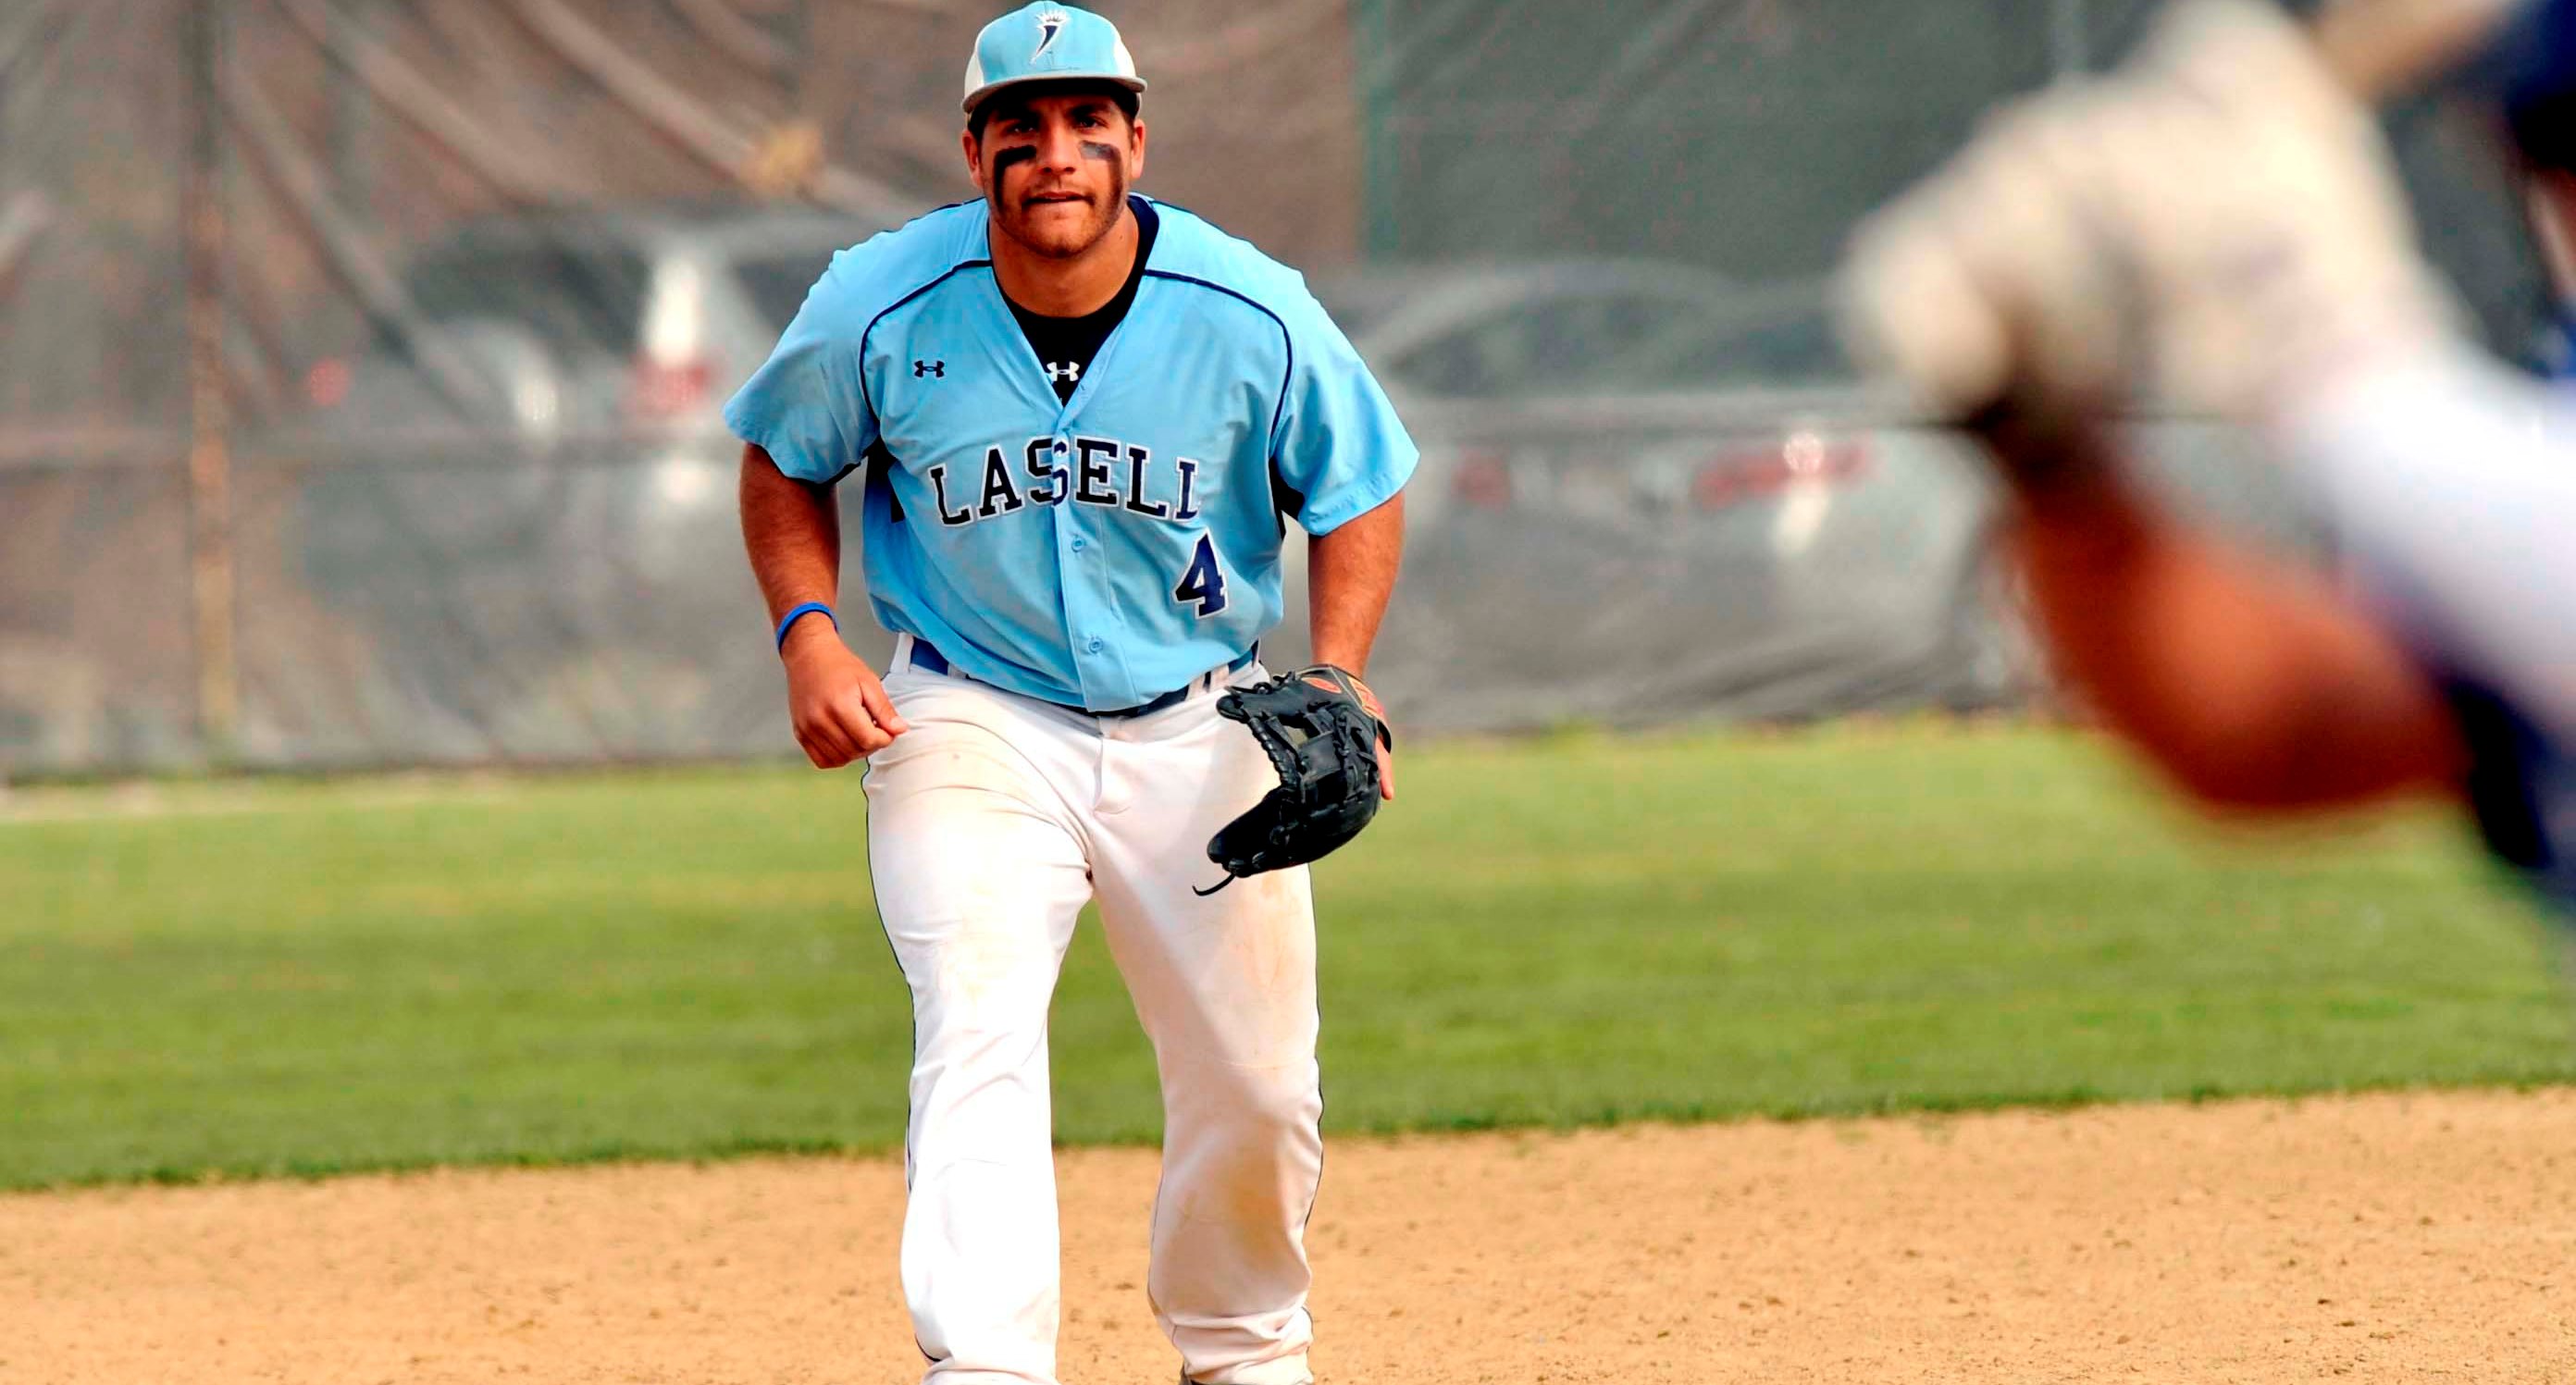 Baseball Stumbles against Lesley in Non-Conference Action